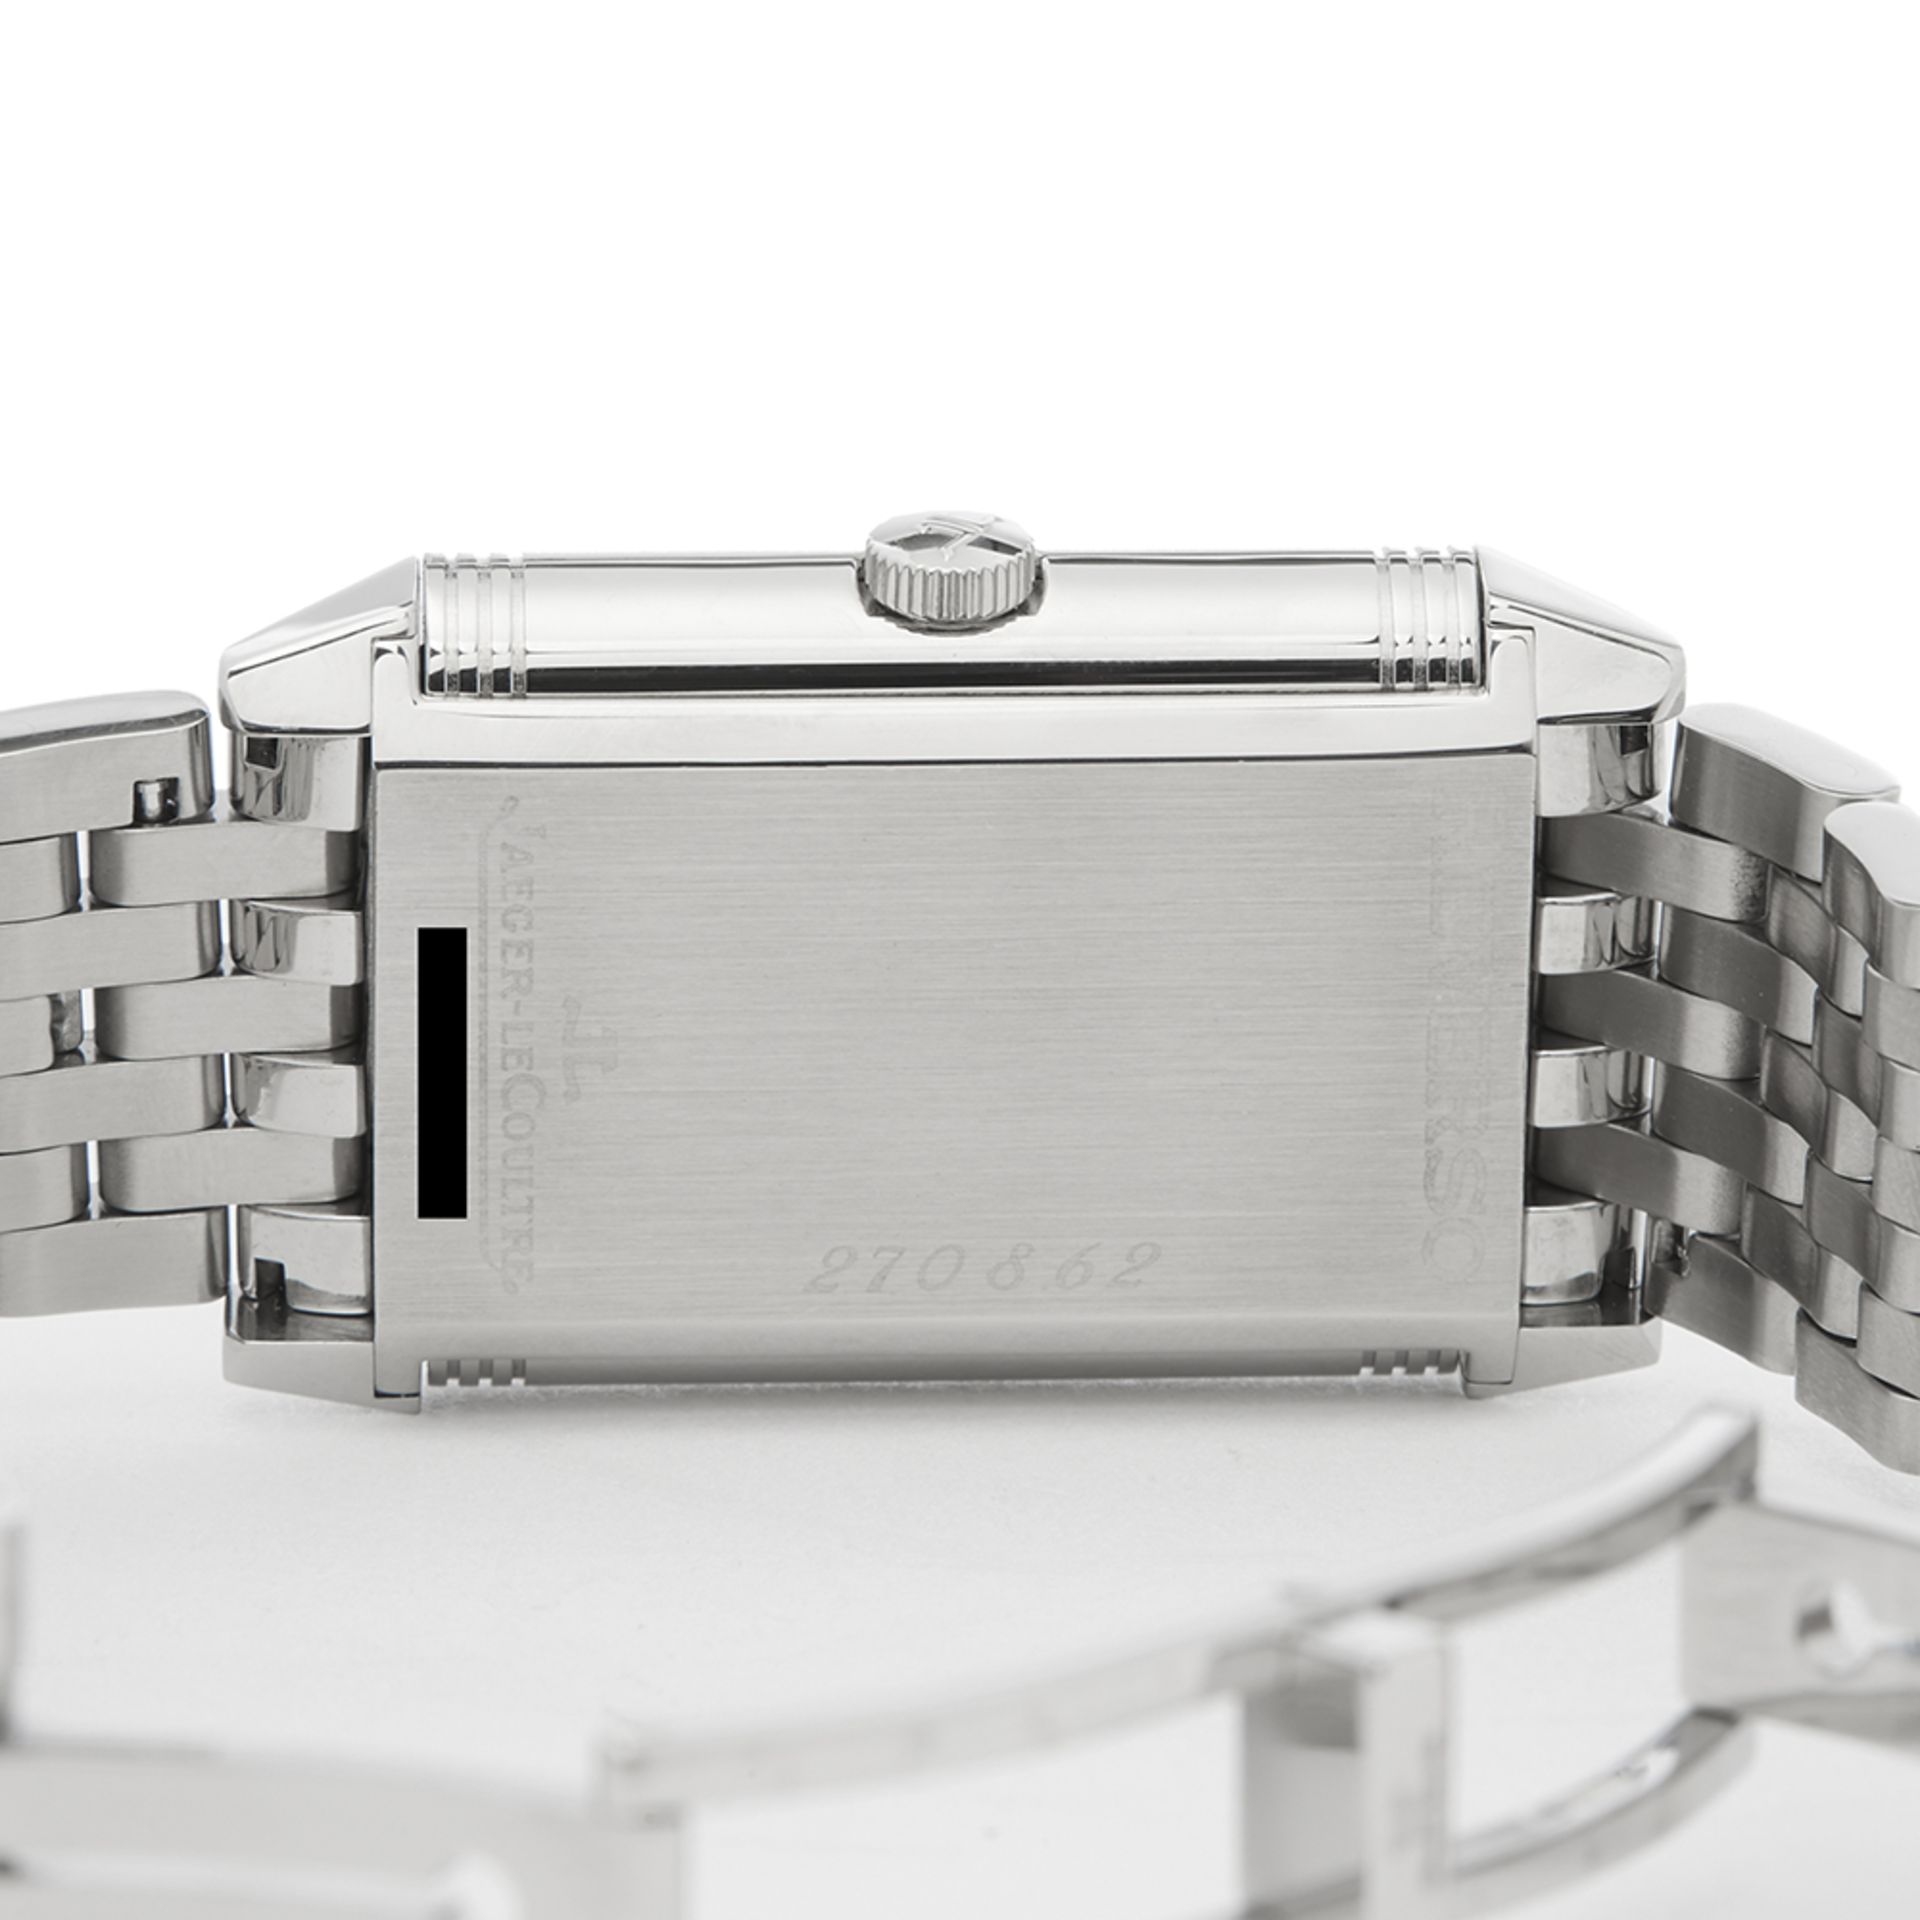 Jaeger-LeCoultre Reverso Stainless Steel - 270.8.62 - Image 8 of 8